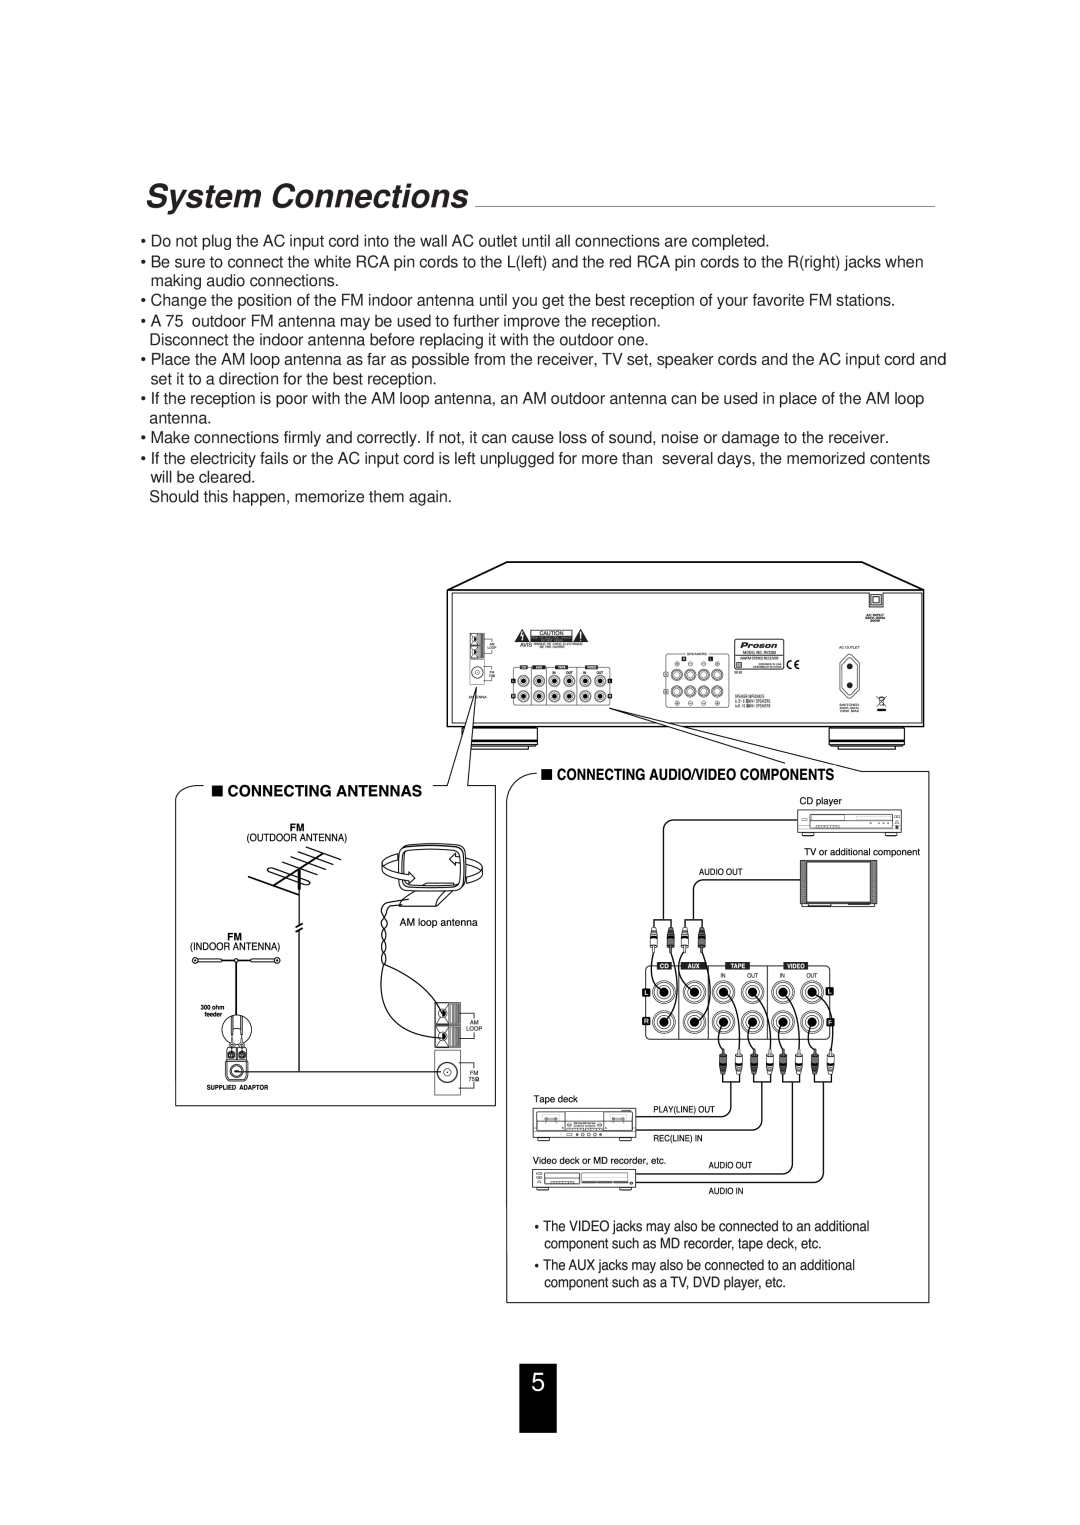 Proson RV 2200 manual System Connections 